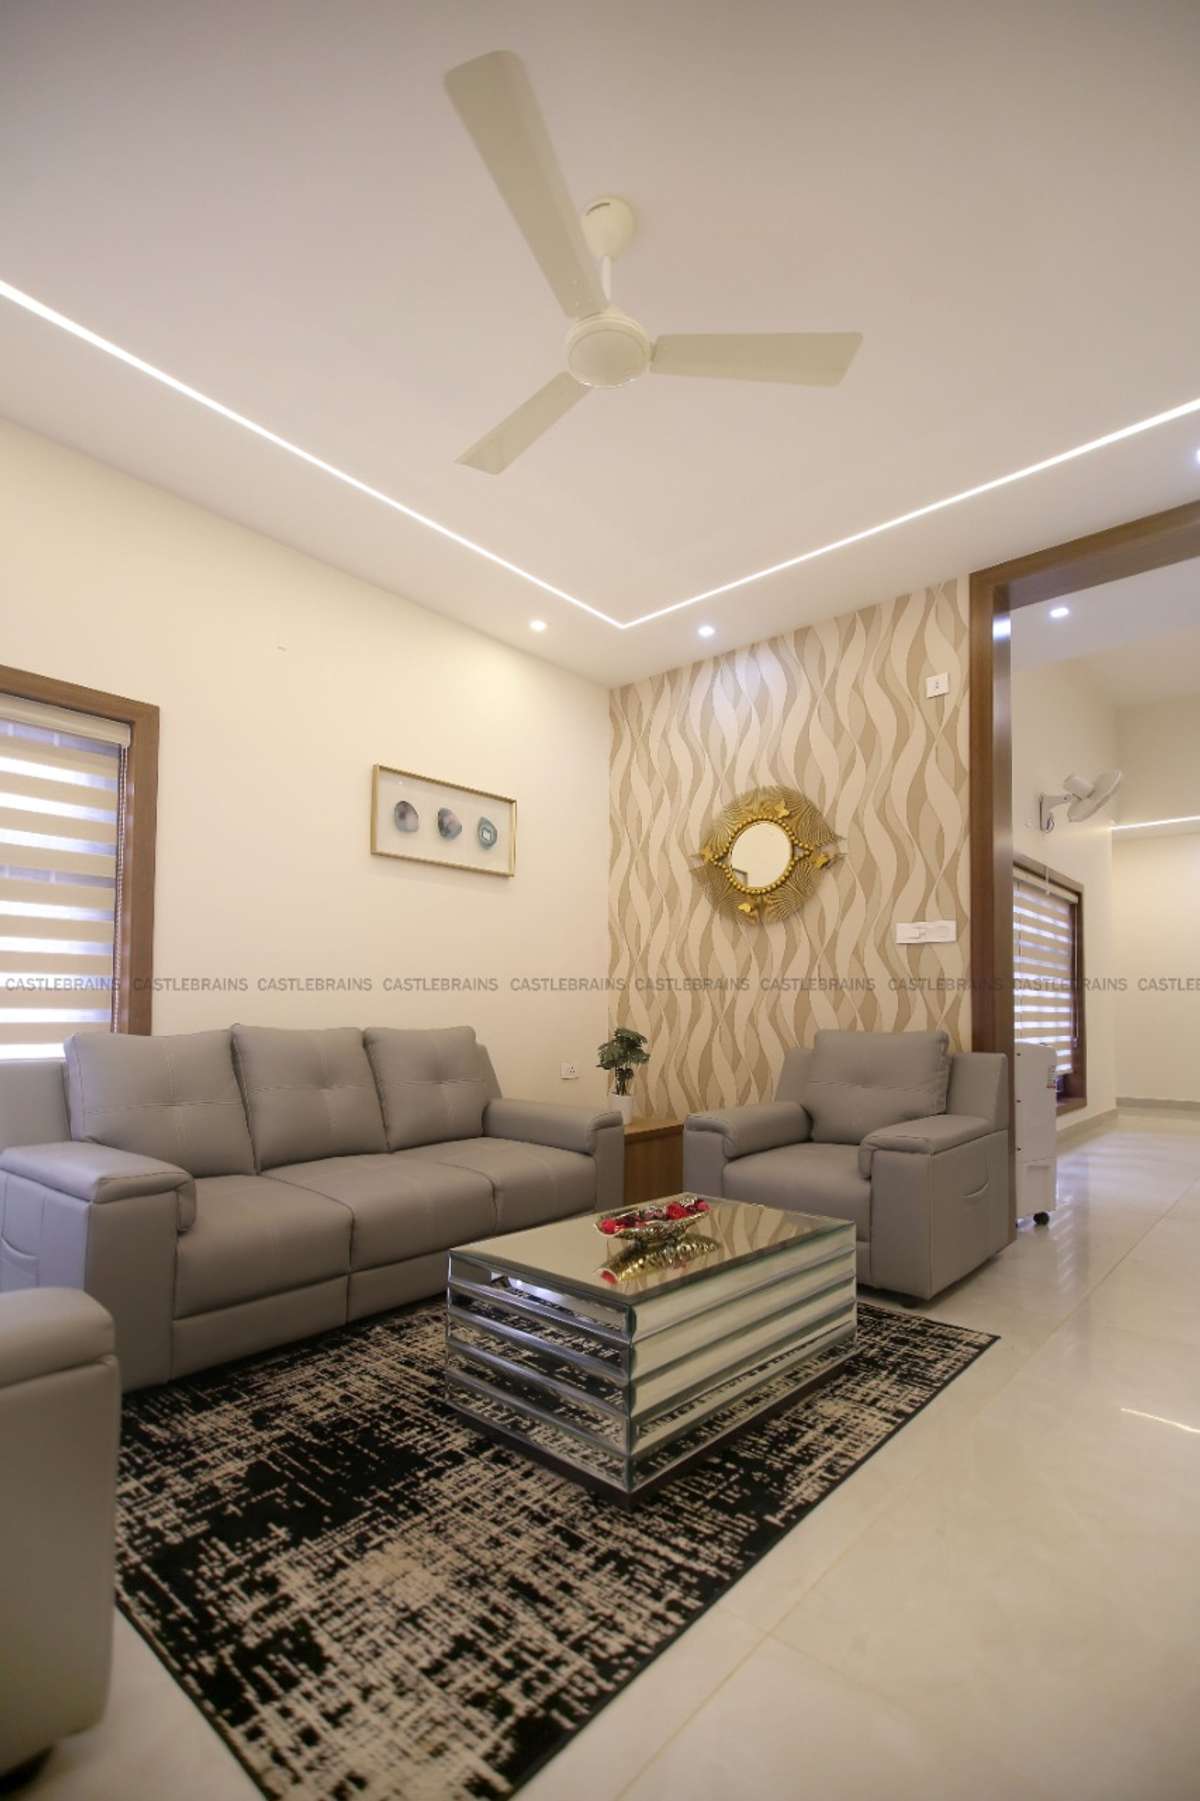 My Recently completed project
Location :pulikkayam, calicut
formal living area
#Architectural&Interior #interior 
 #KeralaStyleHouse #SingleFloorHouse #tropicaldesign #Minimalistic #exteriors #NaturalGrass #naturalstones #photoshoot